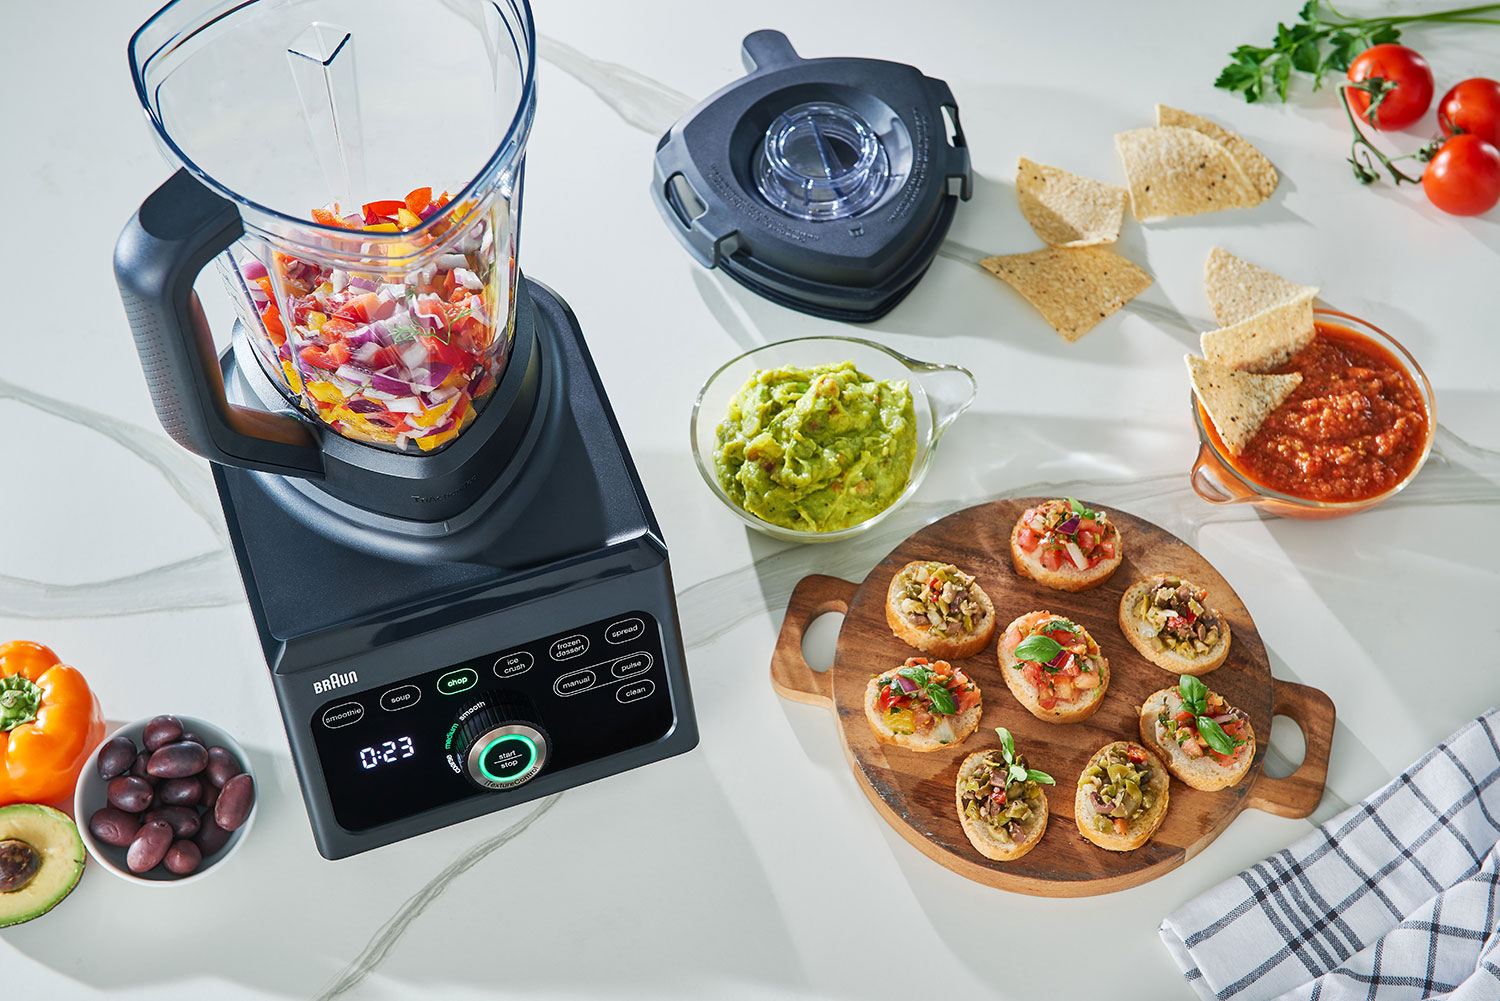 Chopped vegetables in the Braun PowerBlend 9